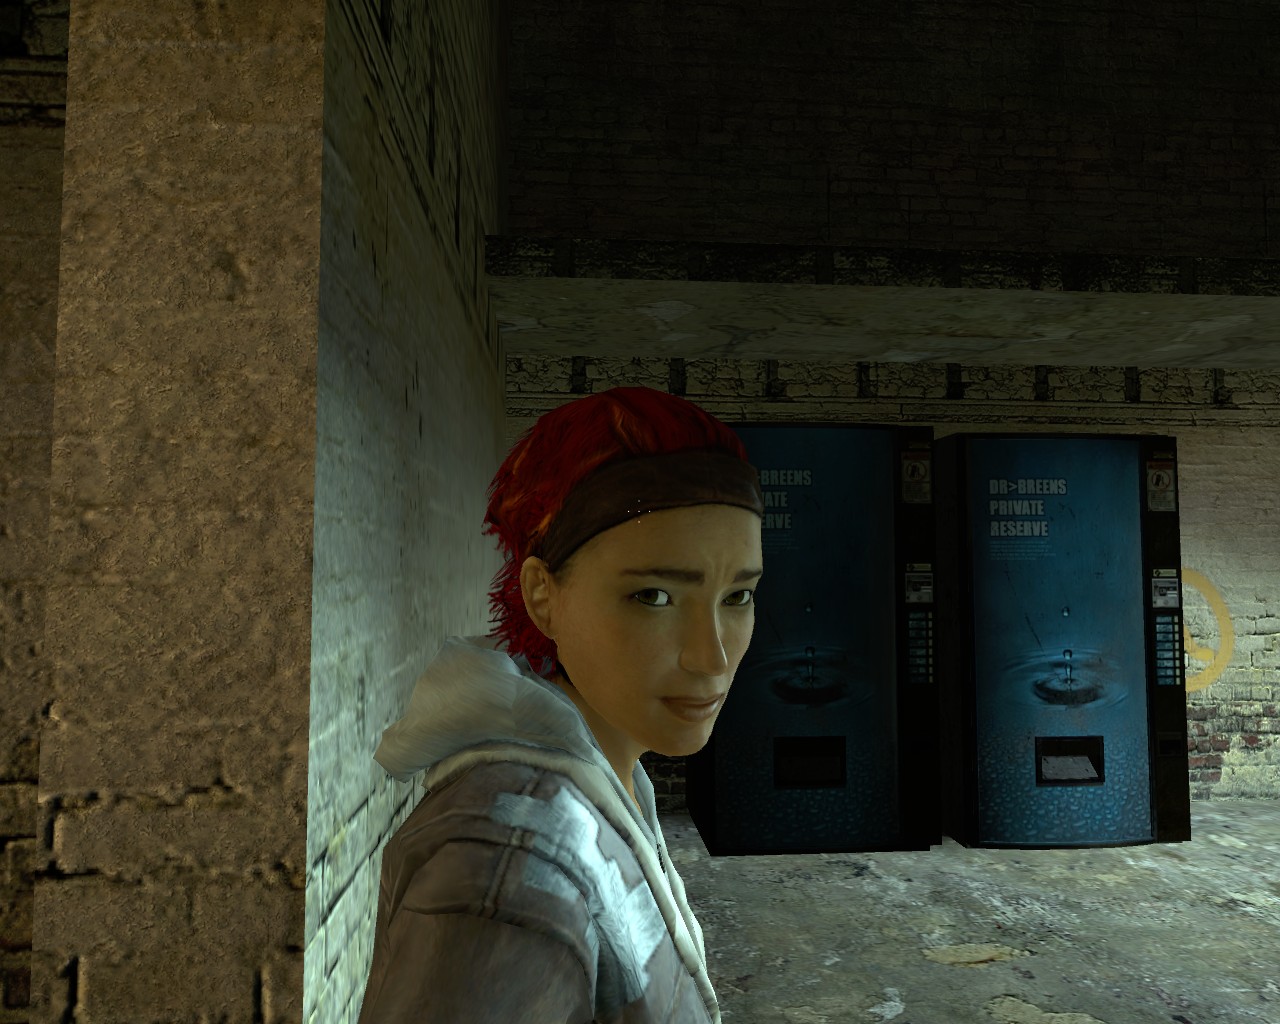 hl2 character redesign image - Half-Life: Alyx can't Jump mod for Half-Life:  Alyx - Mod DB